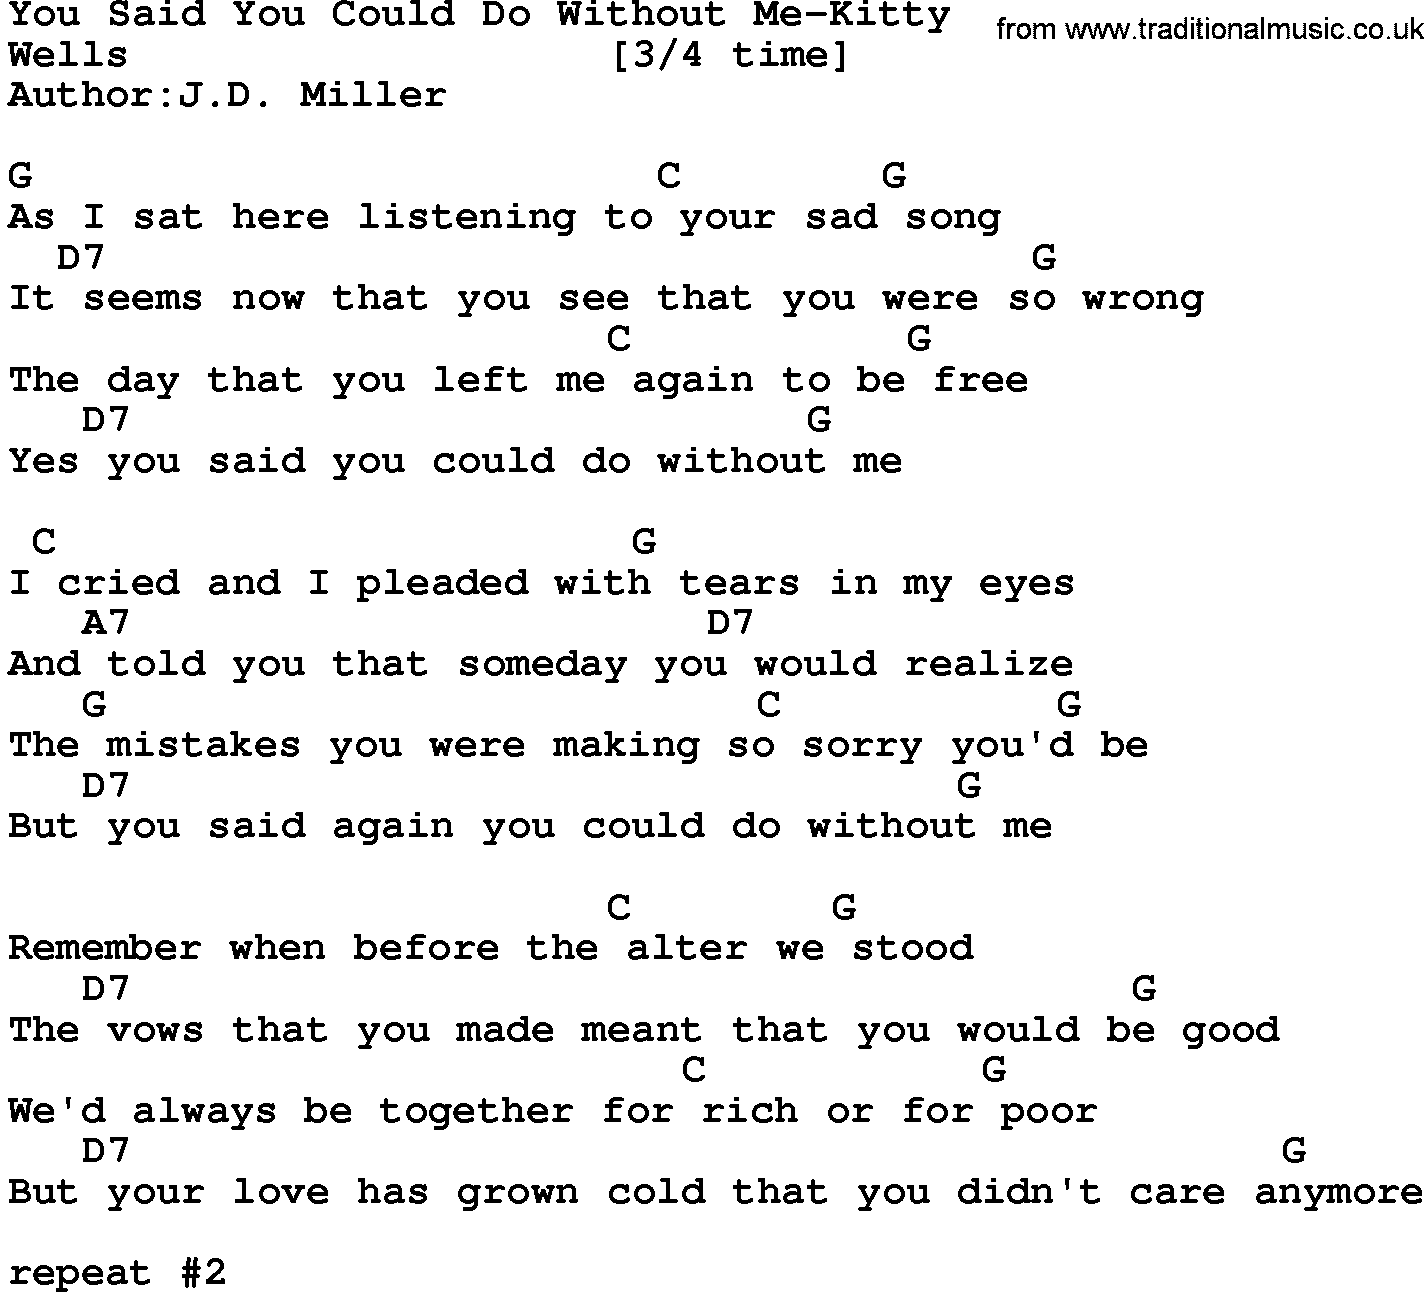 Country Music:You Said You Could Do Without Me-Kitty Lyrics and Chords1424 x 1292